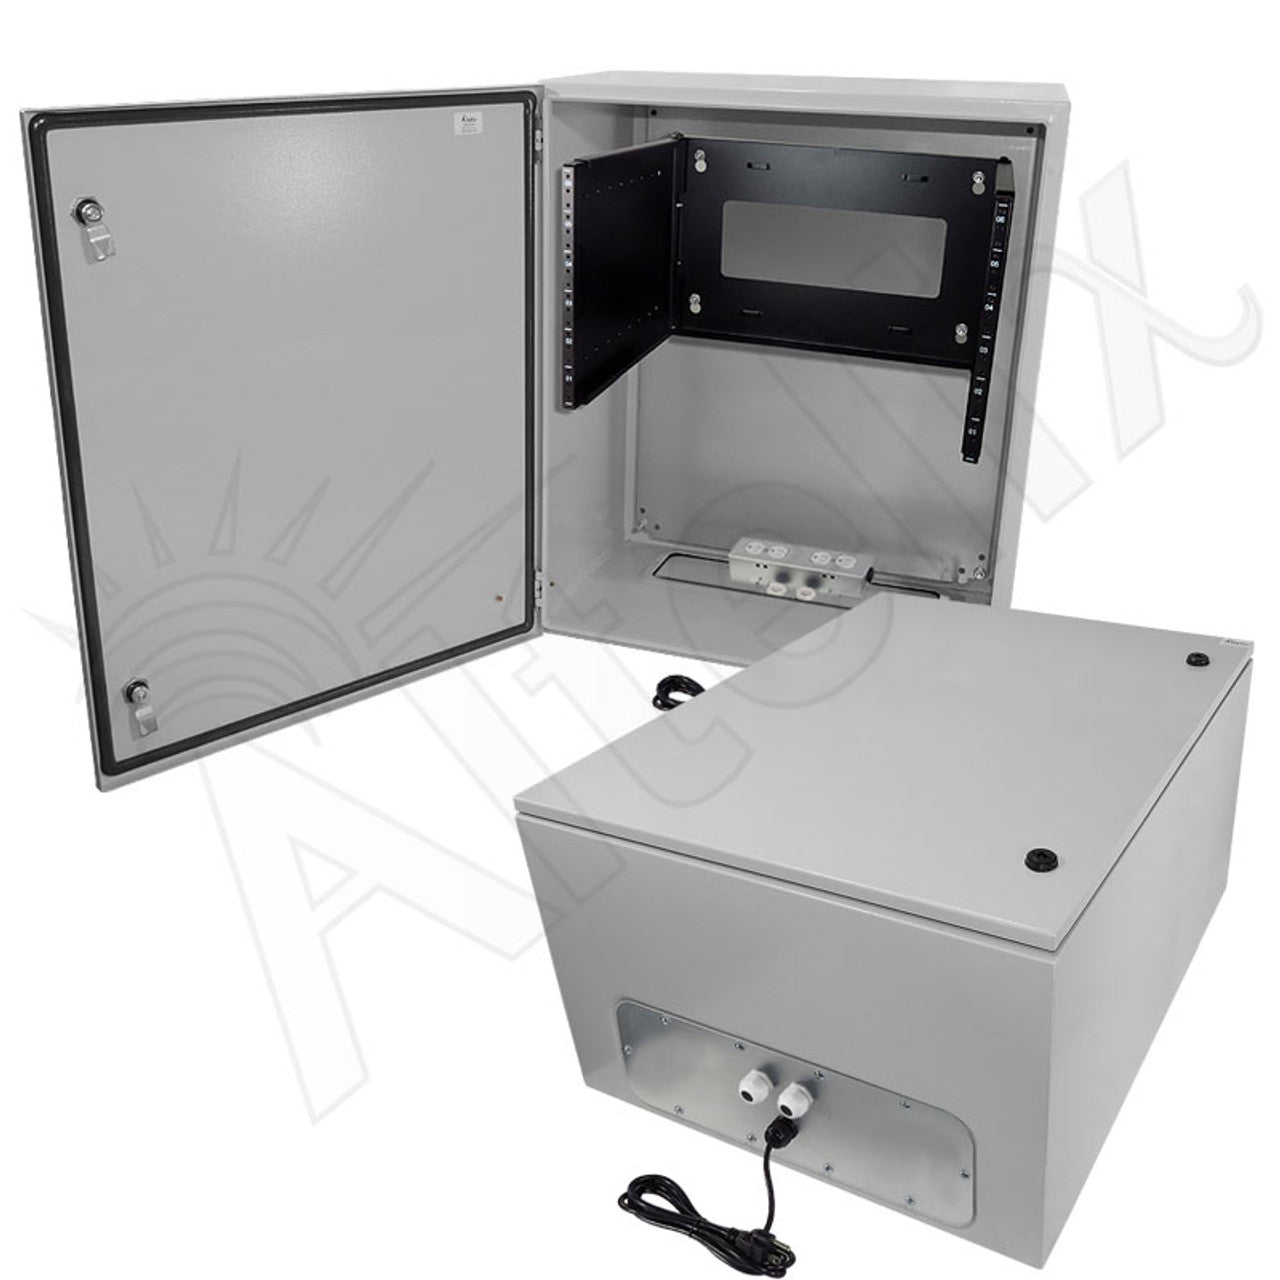 Altelix 19" Wide 6U Rack NEMA 4X Steel Weatherproof Enclosure with 120 VAC Outlets and Power Cord